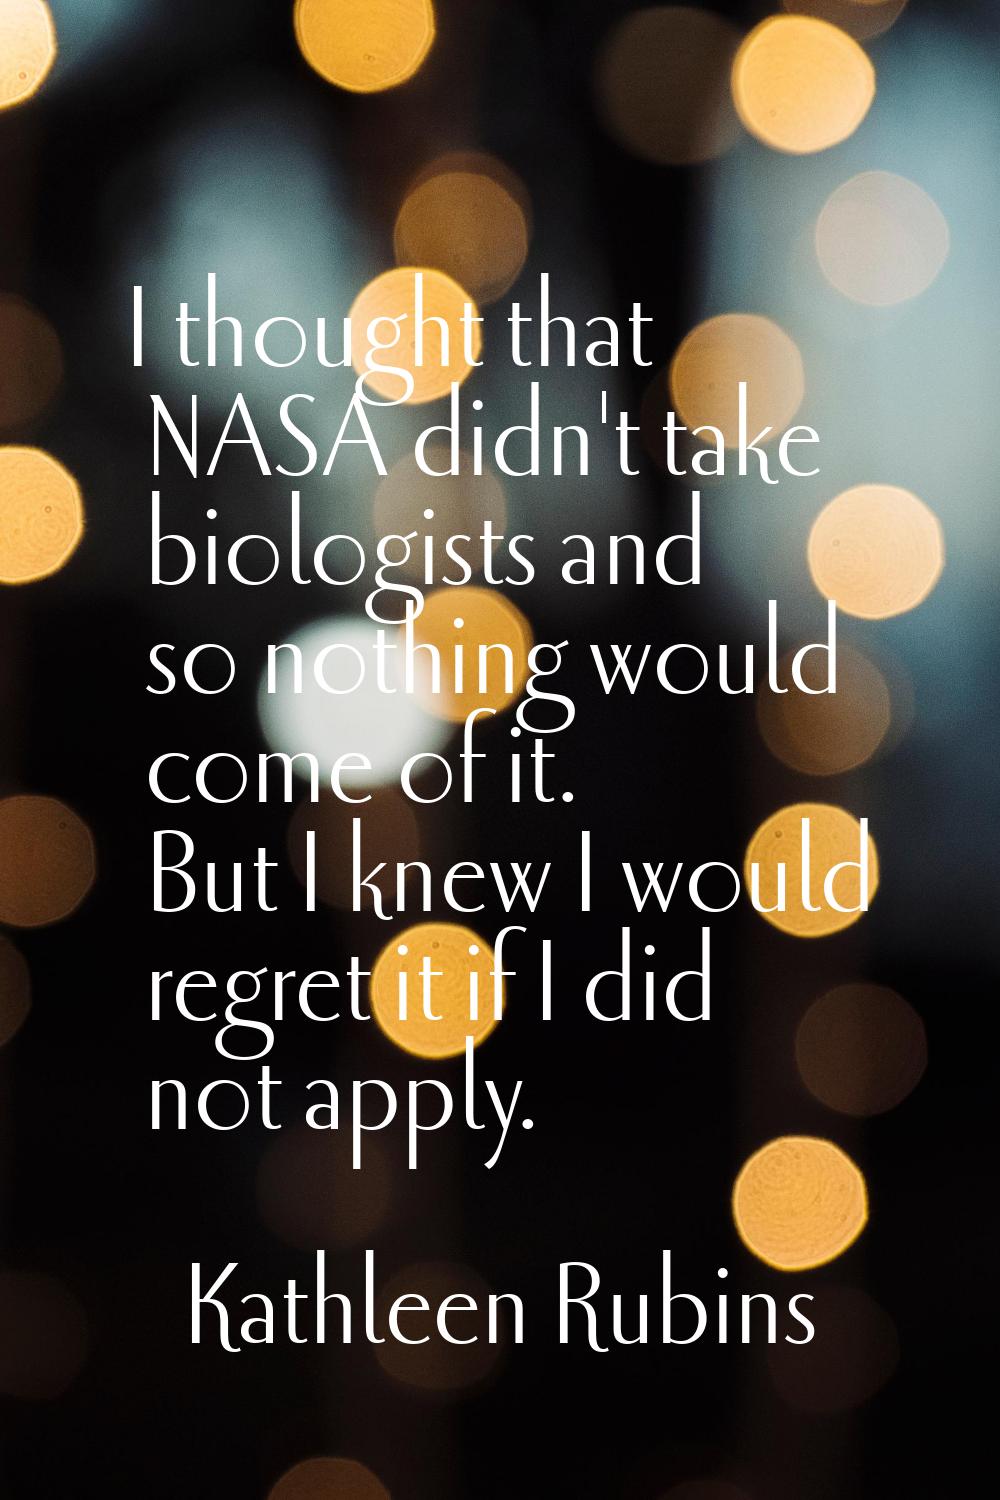 I thought that NASA didn't take biologists and so nothing would come of it. But I knew I would regr